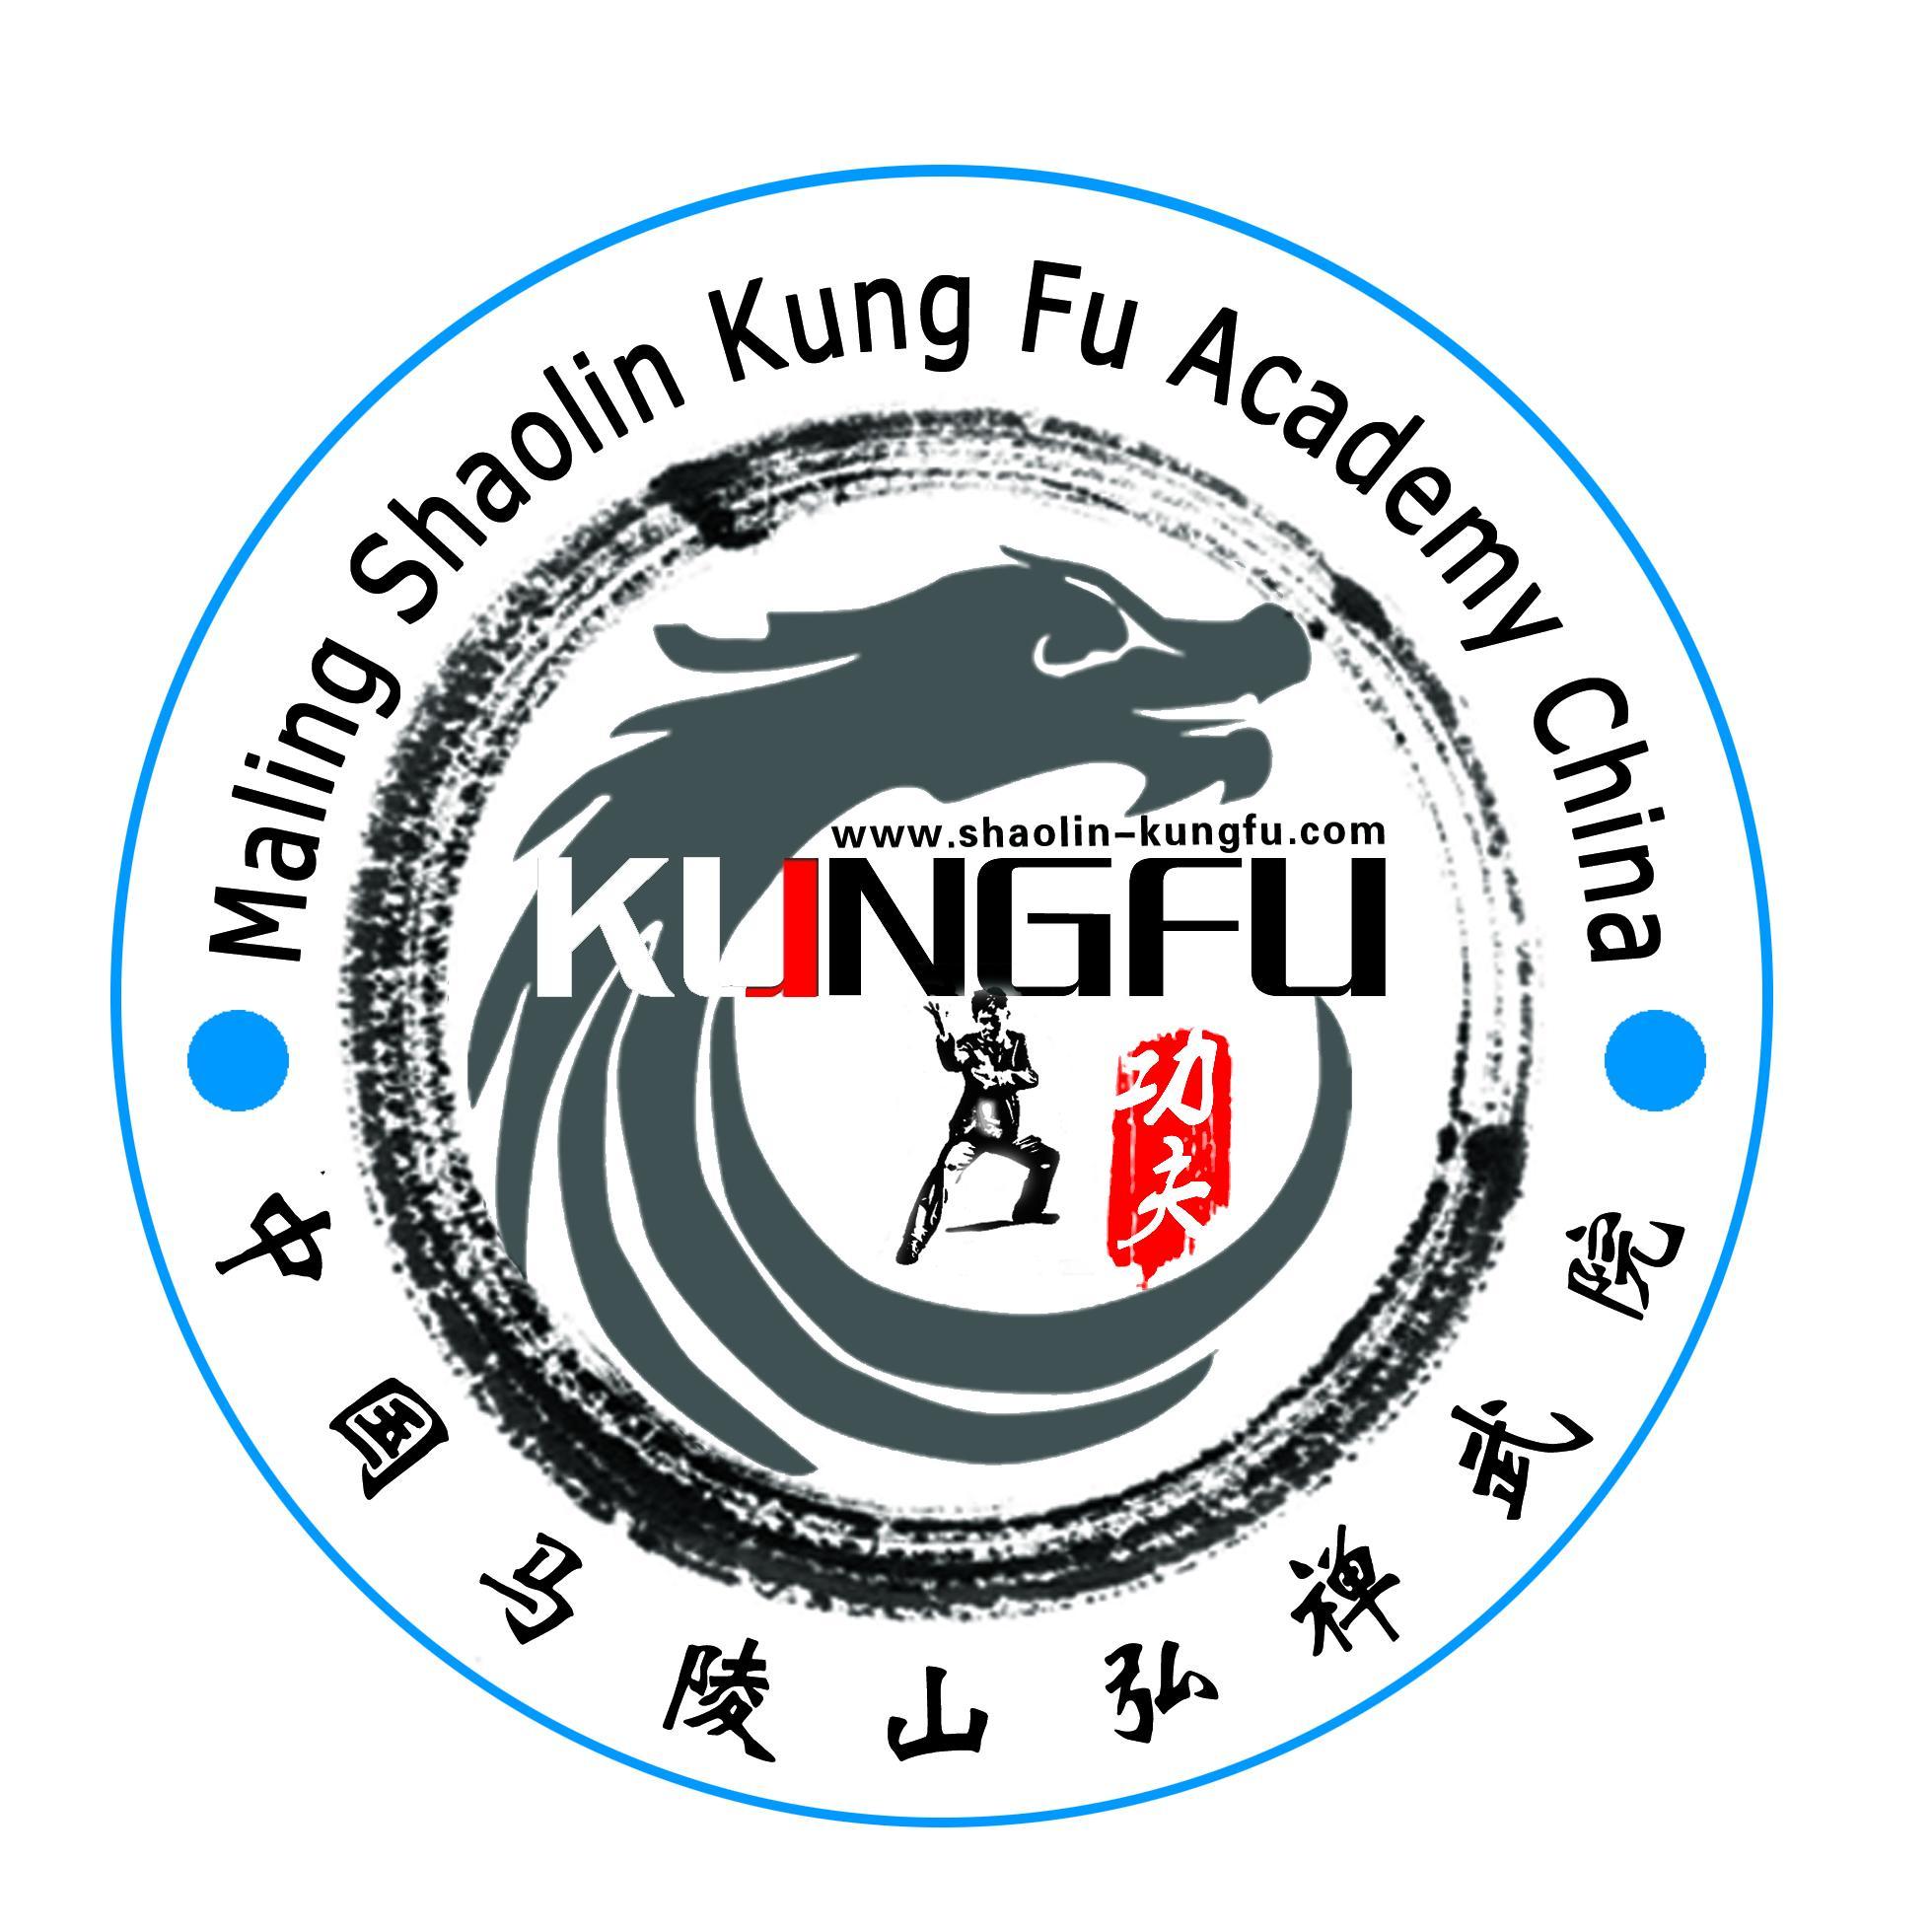 A #kungfuschool in #China where internationals are welcome to learn Chinese #MartialArts (#Shaolin, #taichi, #wingchun, #sanda, etc) from real #kungfu masters!